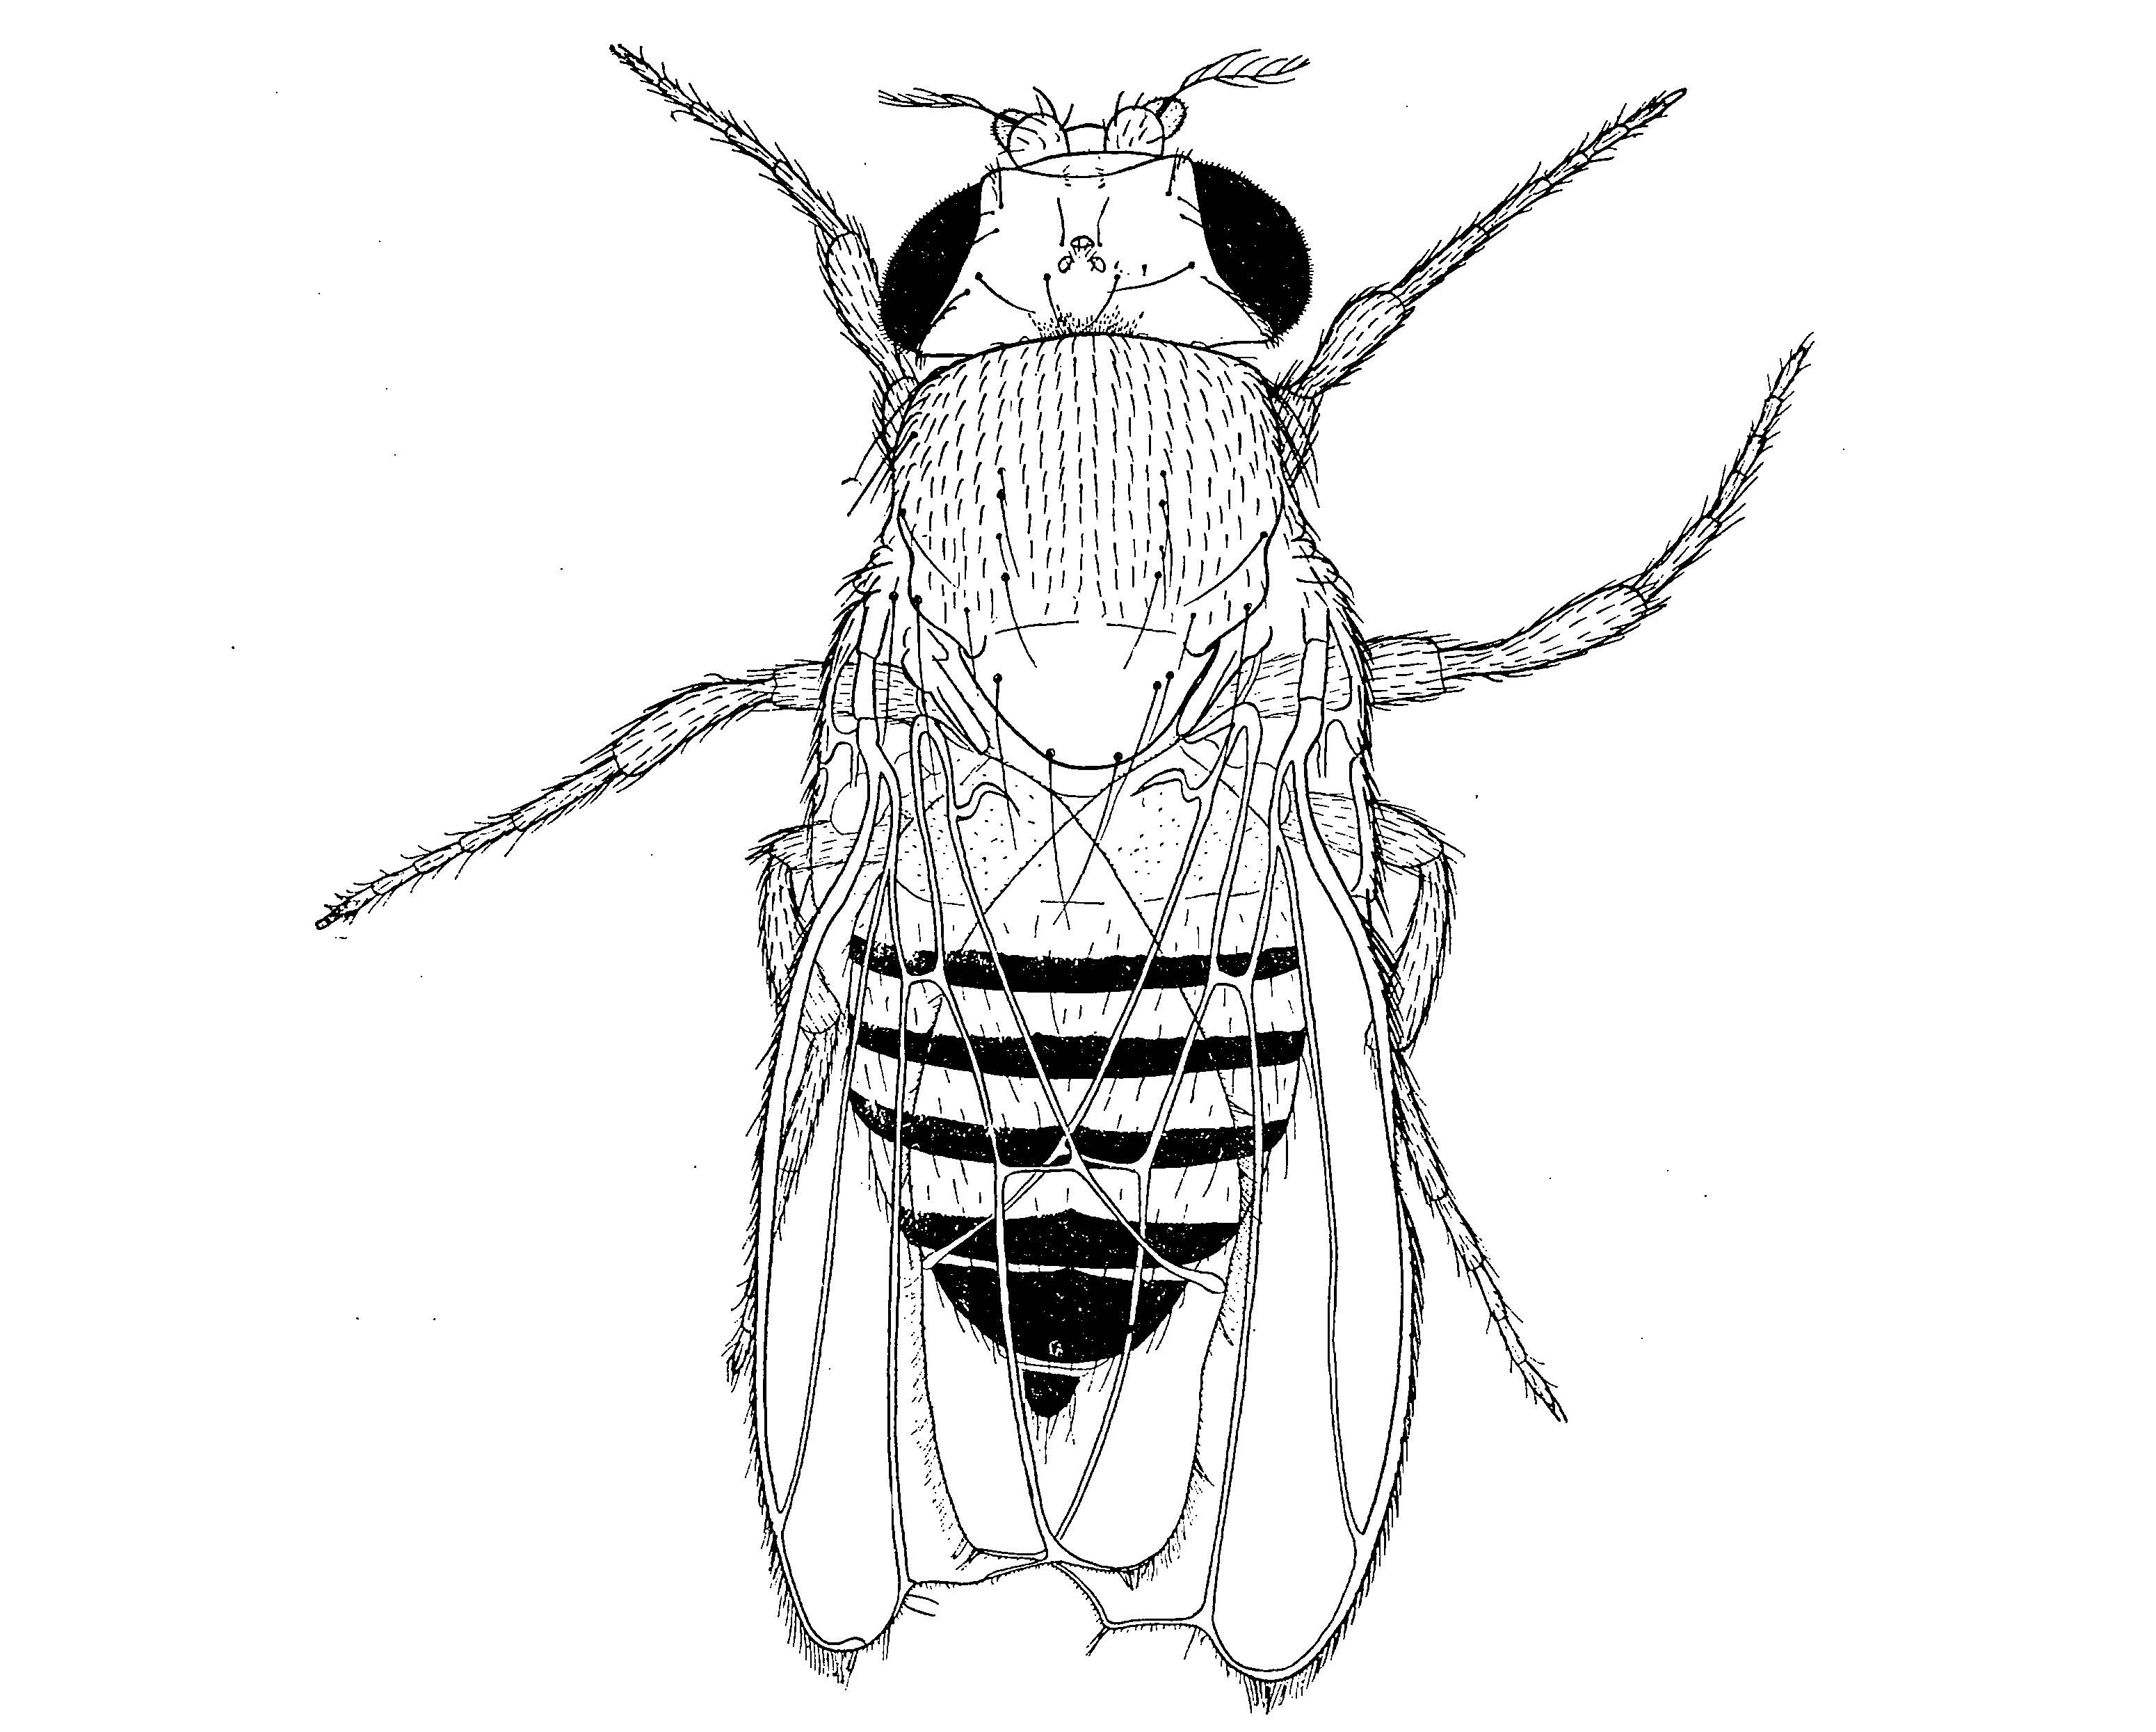 A sketch of a fly with notches in wings